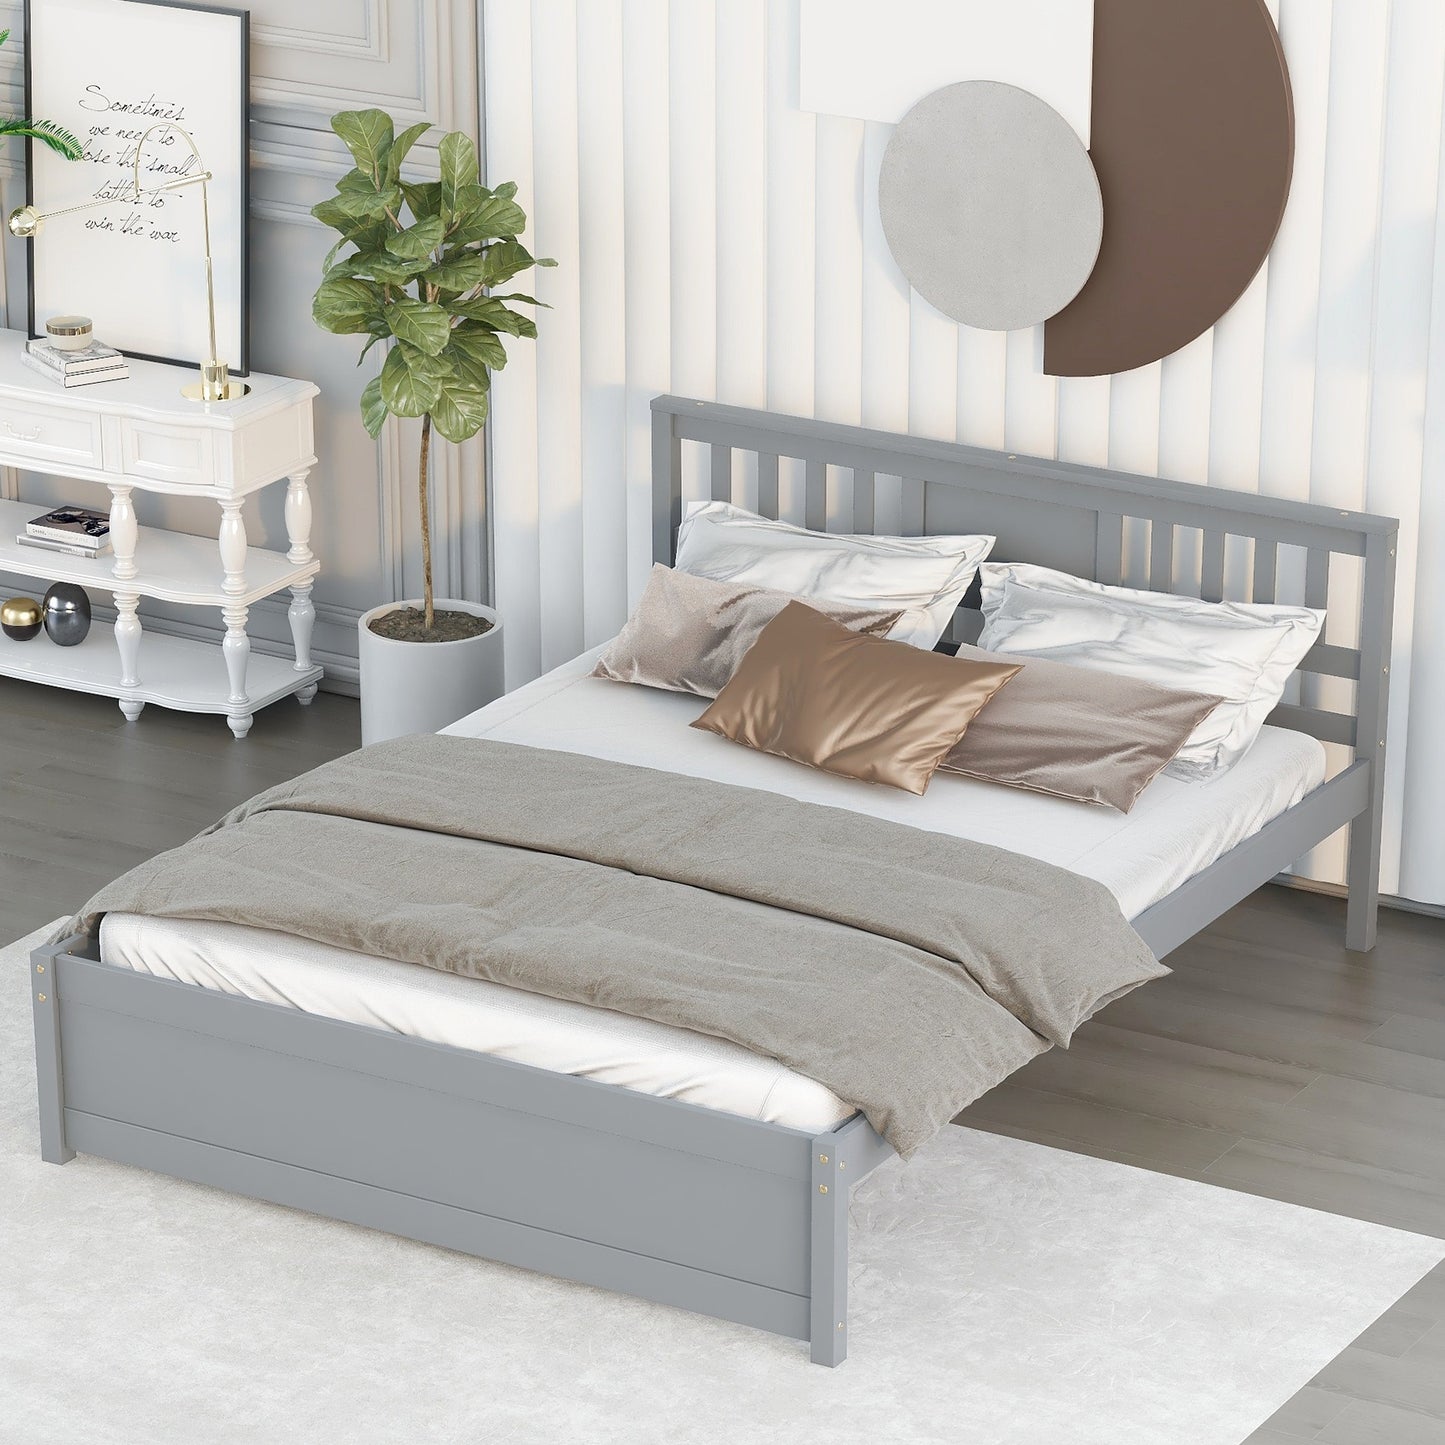 Syngar King Size Platform Bed with Headboard, Solid Wood Frame with Headboard, 800 Lbs. Weight Capacity, White, LJ2093